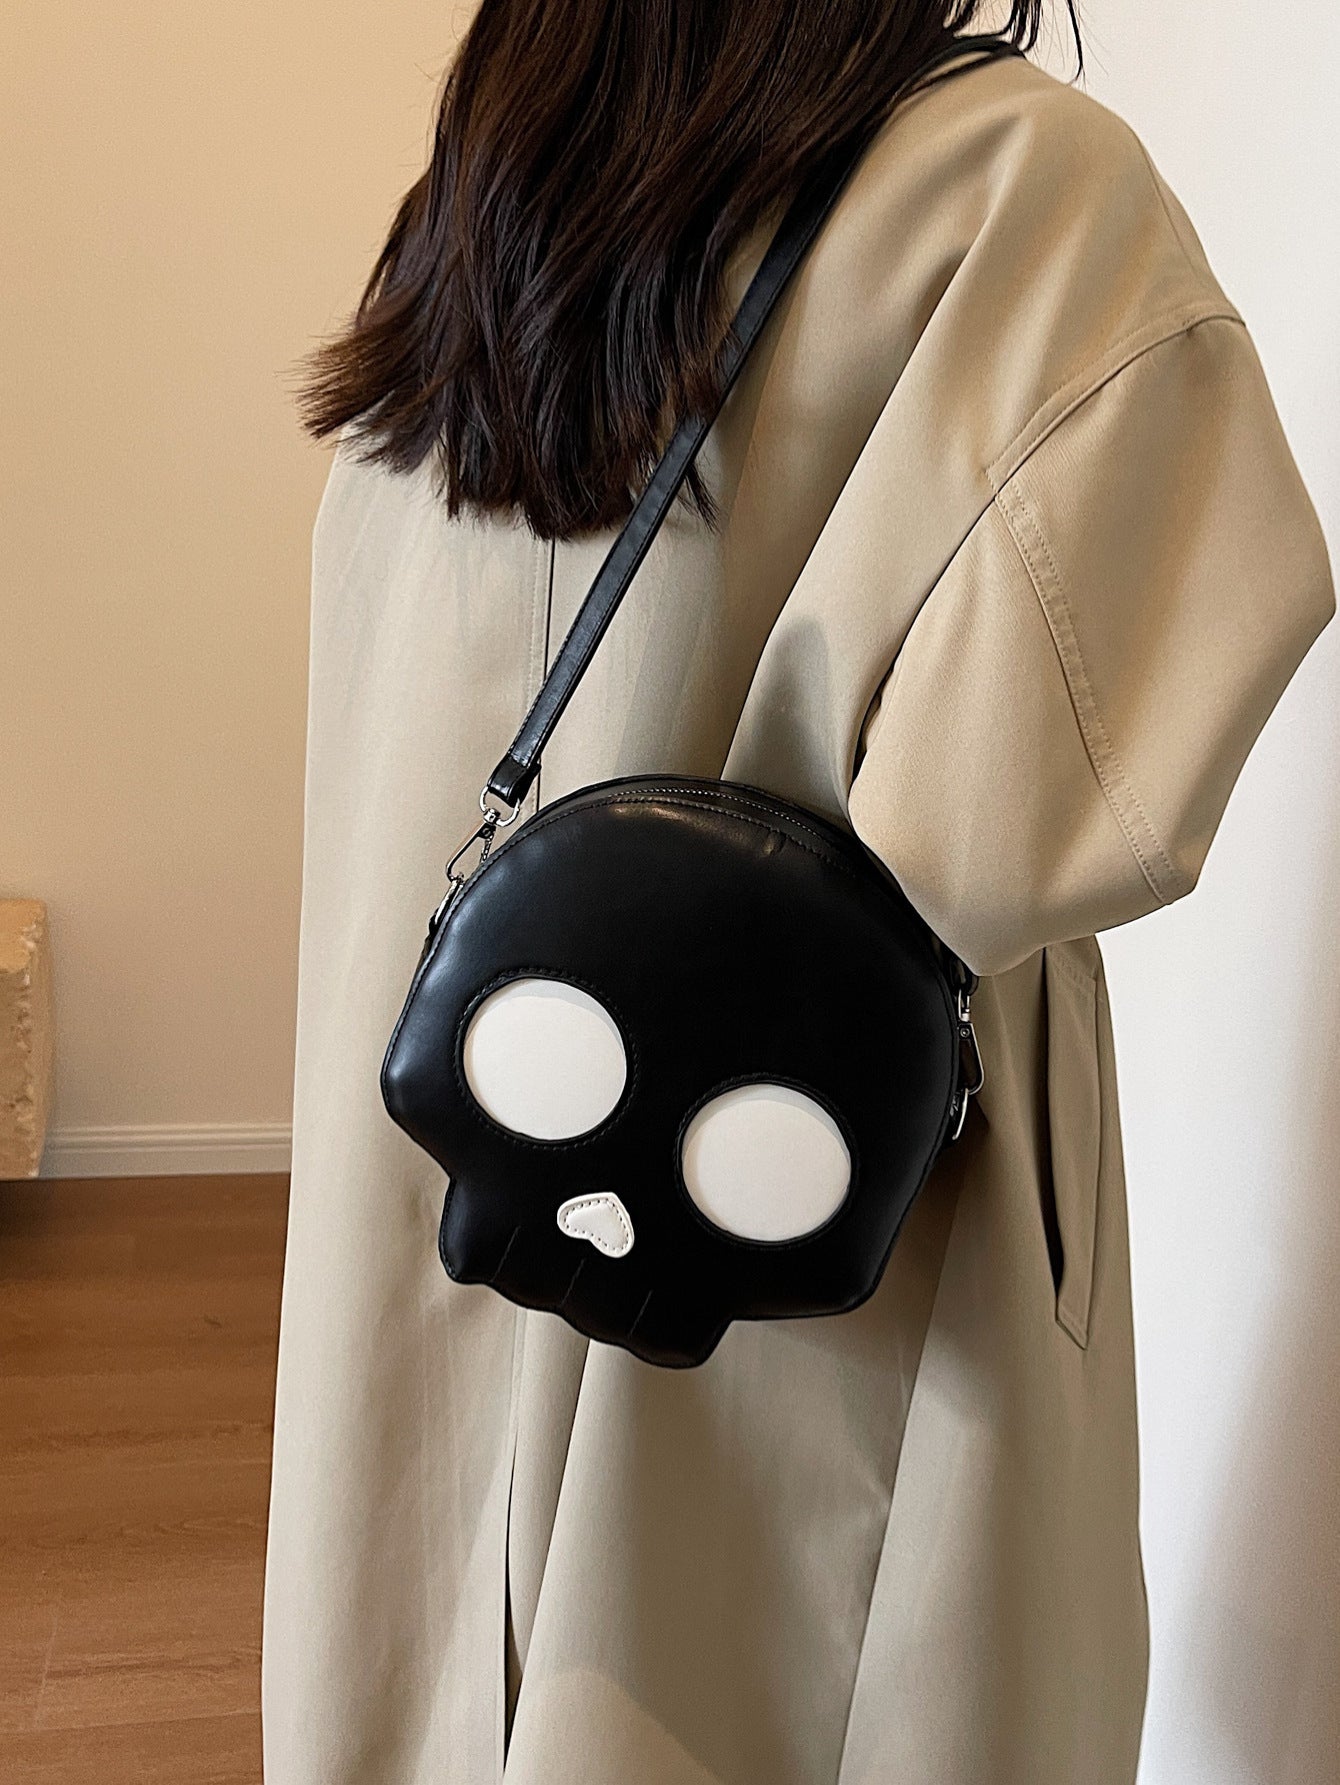 Small Round Skull Purse in Black or white, a Versatile Halloween Inspired Shoulder Bag